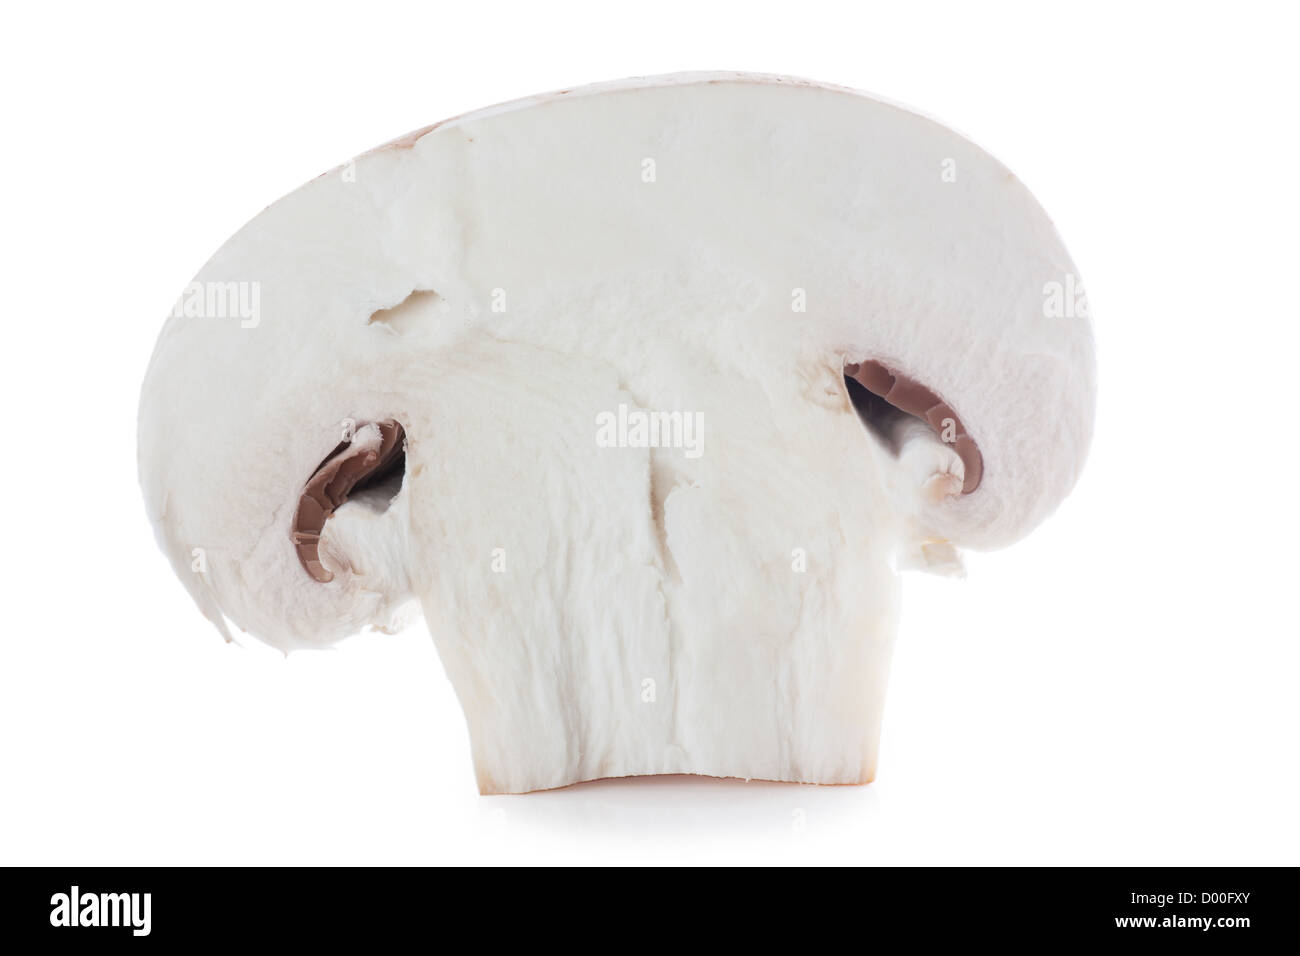 A section of mushroom isolated over white Stock Photo